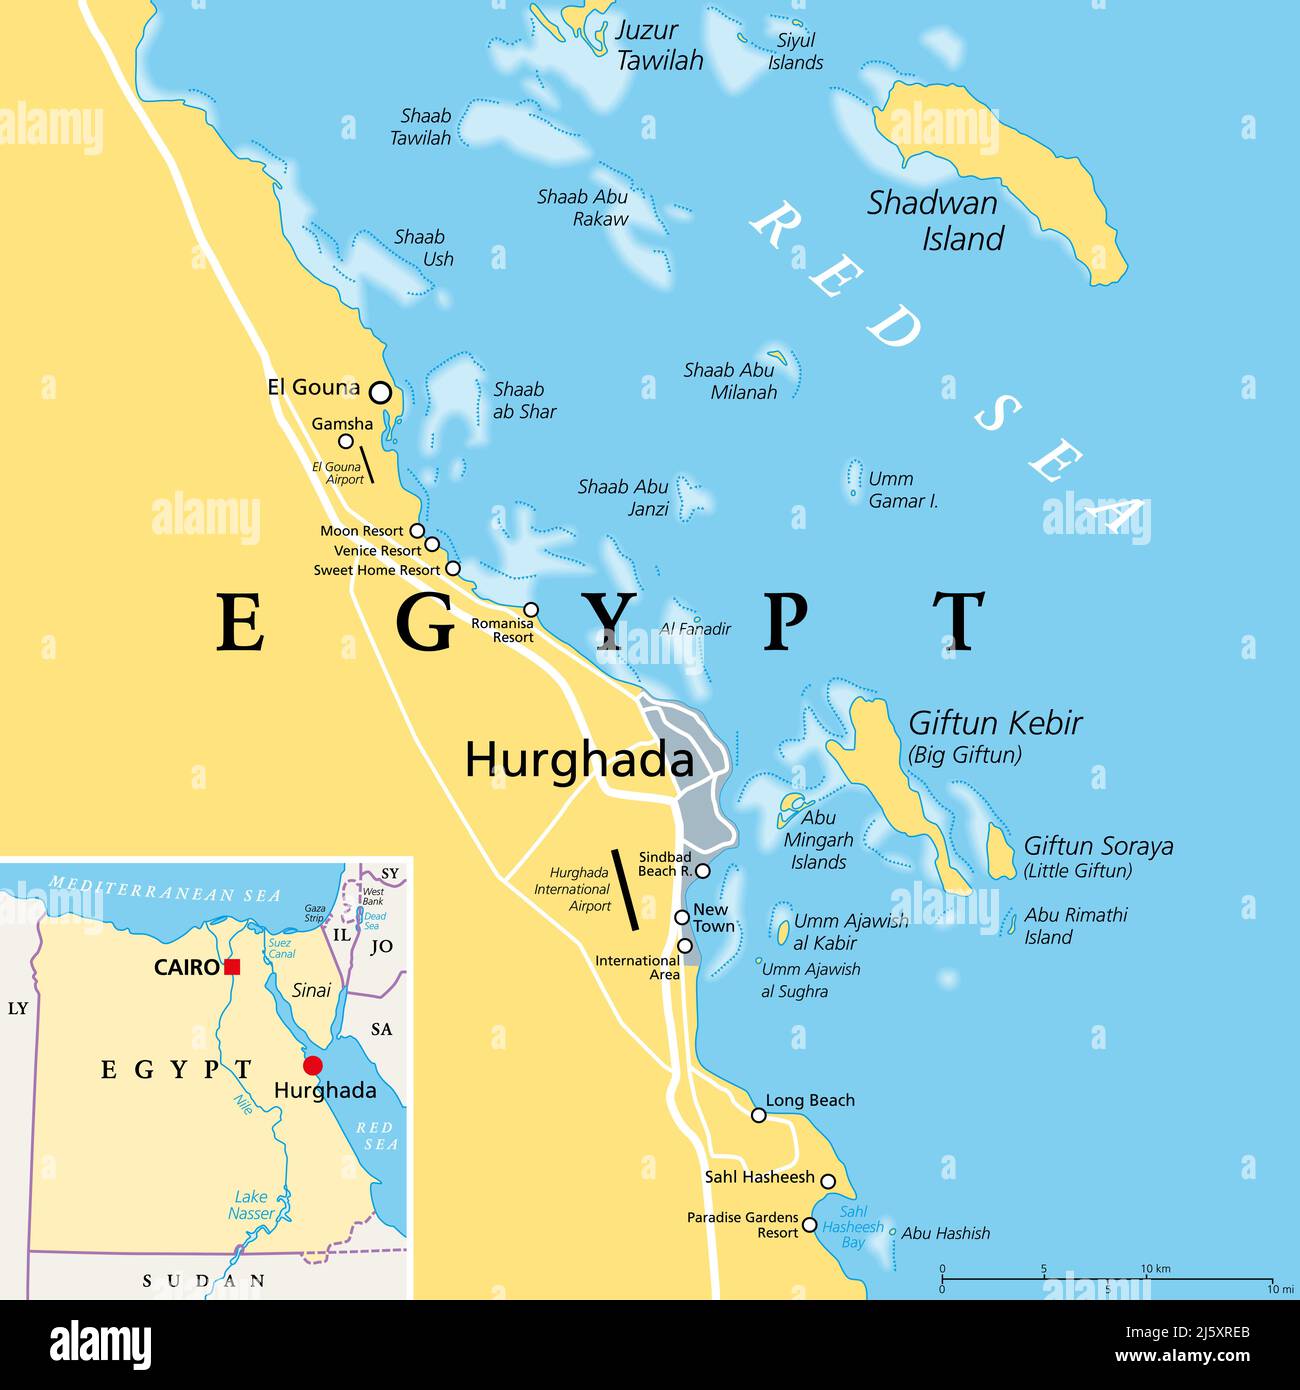 Hurghada and vicinity, Egypt, political map. City and area in the Red Sea Governorate of Egypt, and one of the main tourist centres of the country. Stock Photo